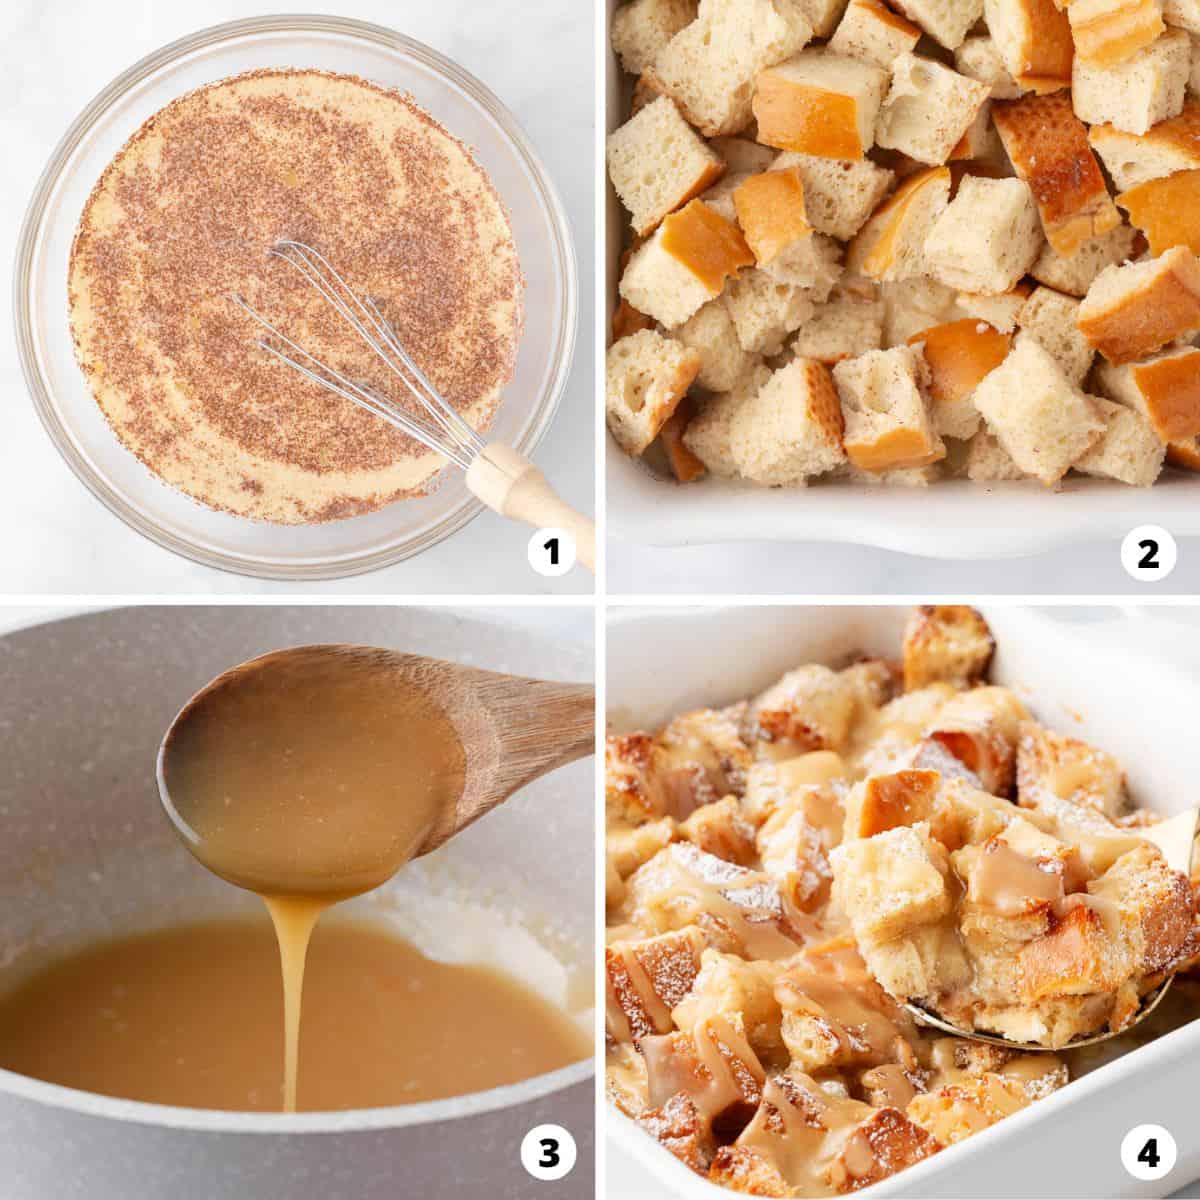 Showing how to make bread pudding in a 4 step collage.